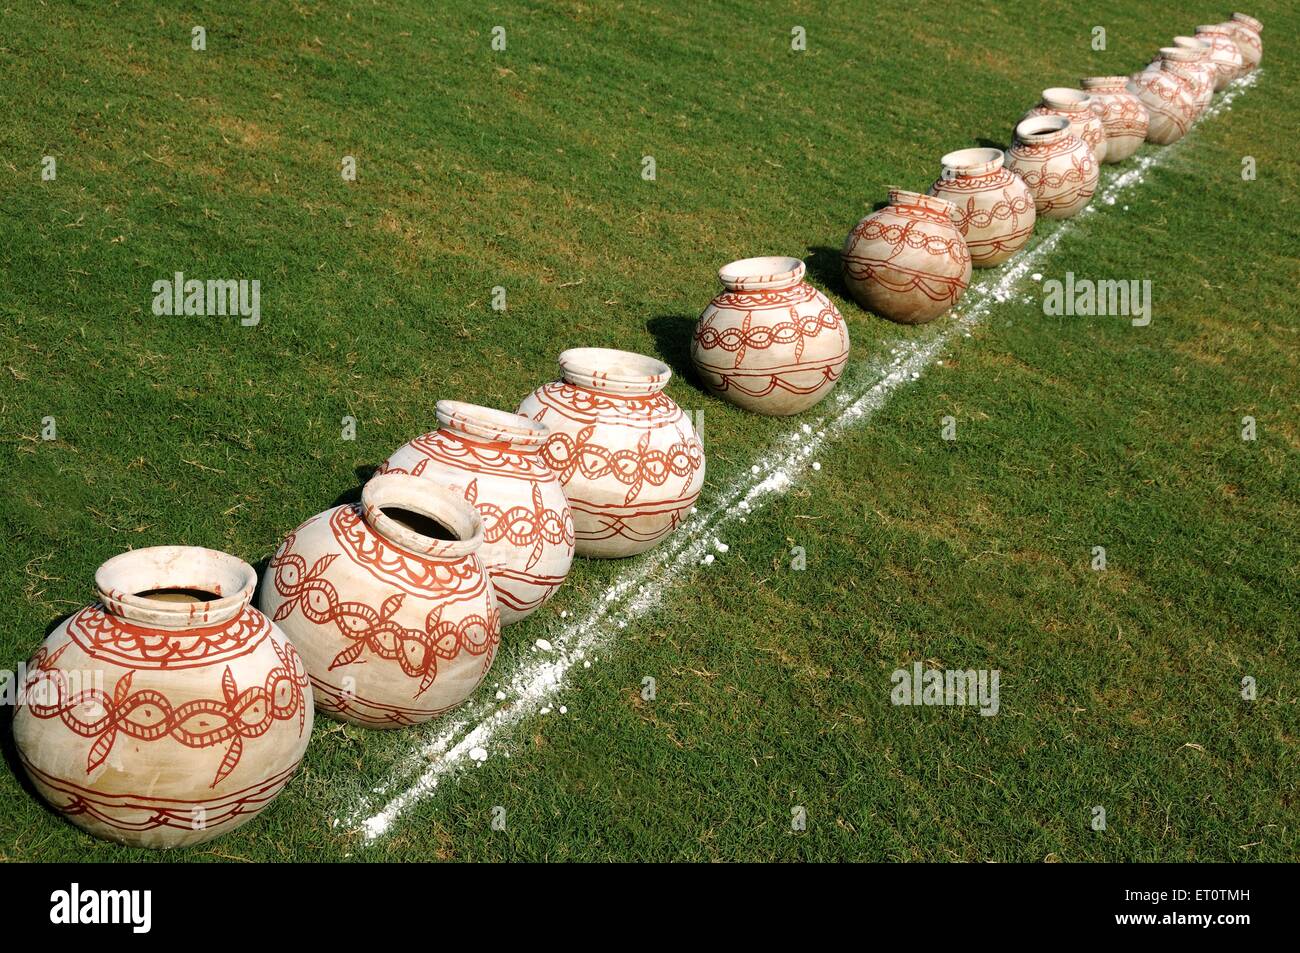 Painted clay water pots for race, Jodhpur, Rajasthan, India Stock Photo